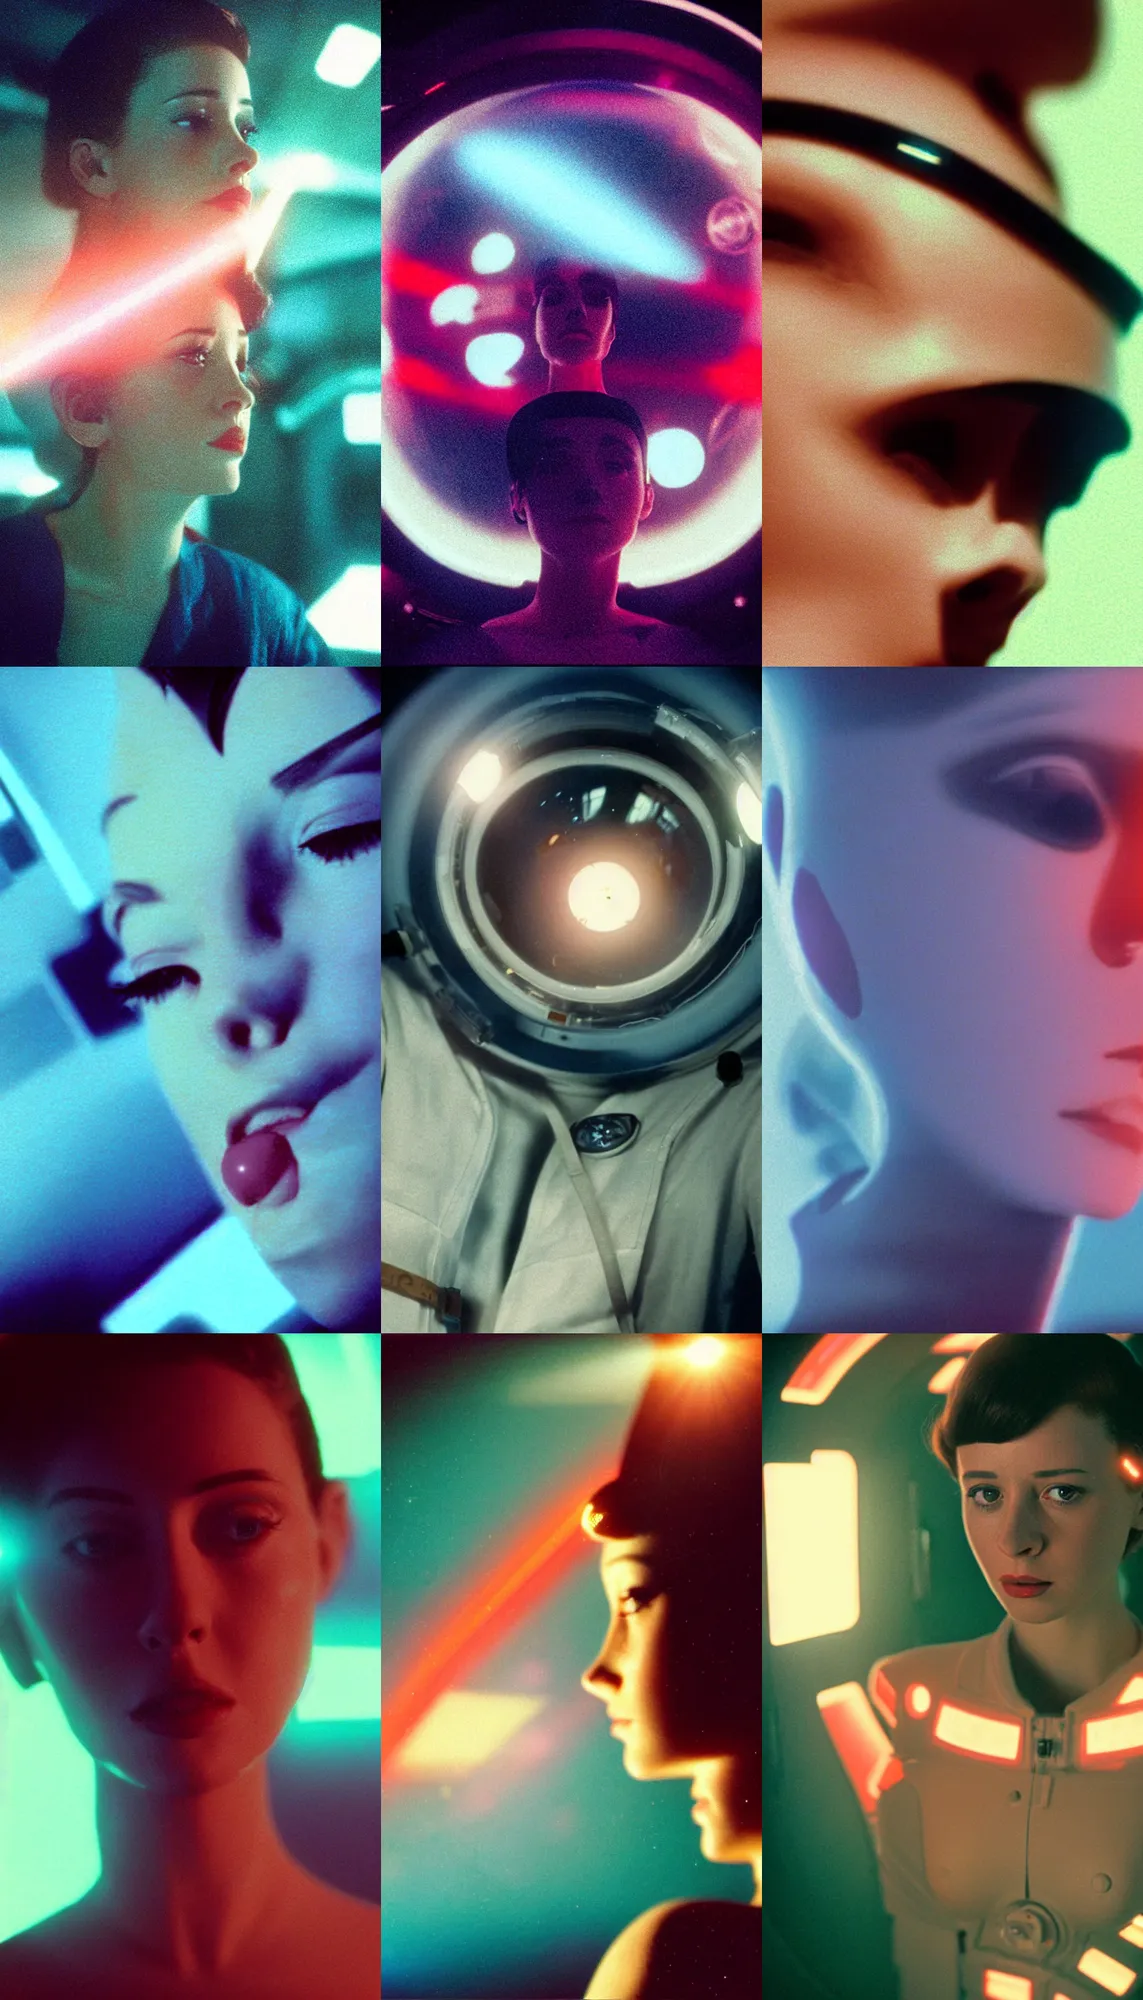 Prompt: Cinestill 50d, 8K, 35mm,J.J Abrams flare; beautiful ultra realistic vaporwave minimalistic pointé posed psilocybe pilot in space(1950) film still medical lab scene, 2000s frontiers in blade runner retrofuturism fashion magazine September hyperrealism holly herndon edition, highly detailed, extreme closeup three-quarter pointé posed model portrait, tilt shift background, three point perspective: focus on anti-g flight suit;pointé pose;open mouth,terrified, eye contact, soft lighting